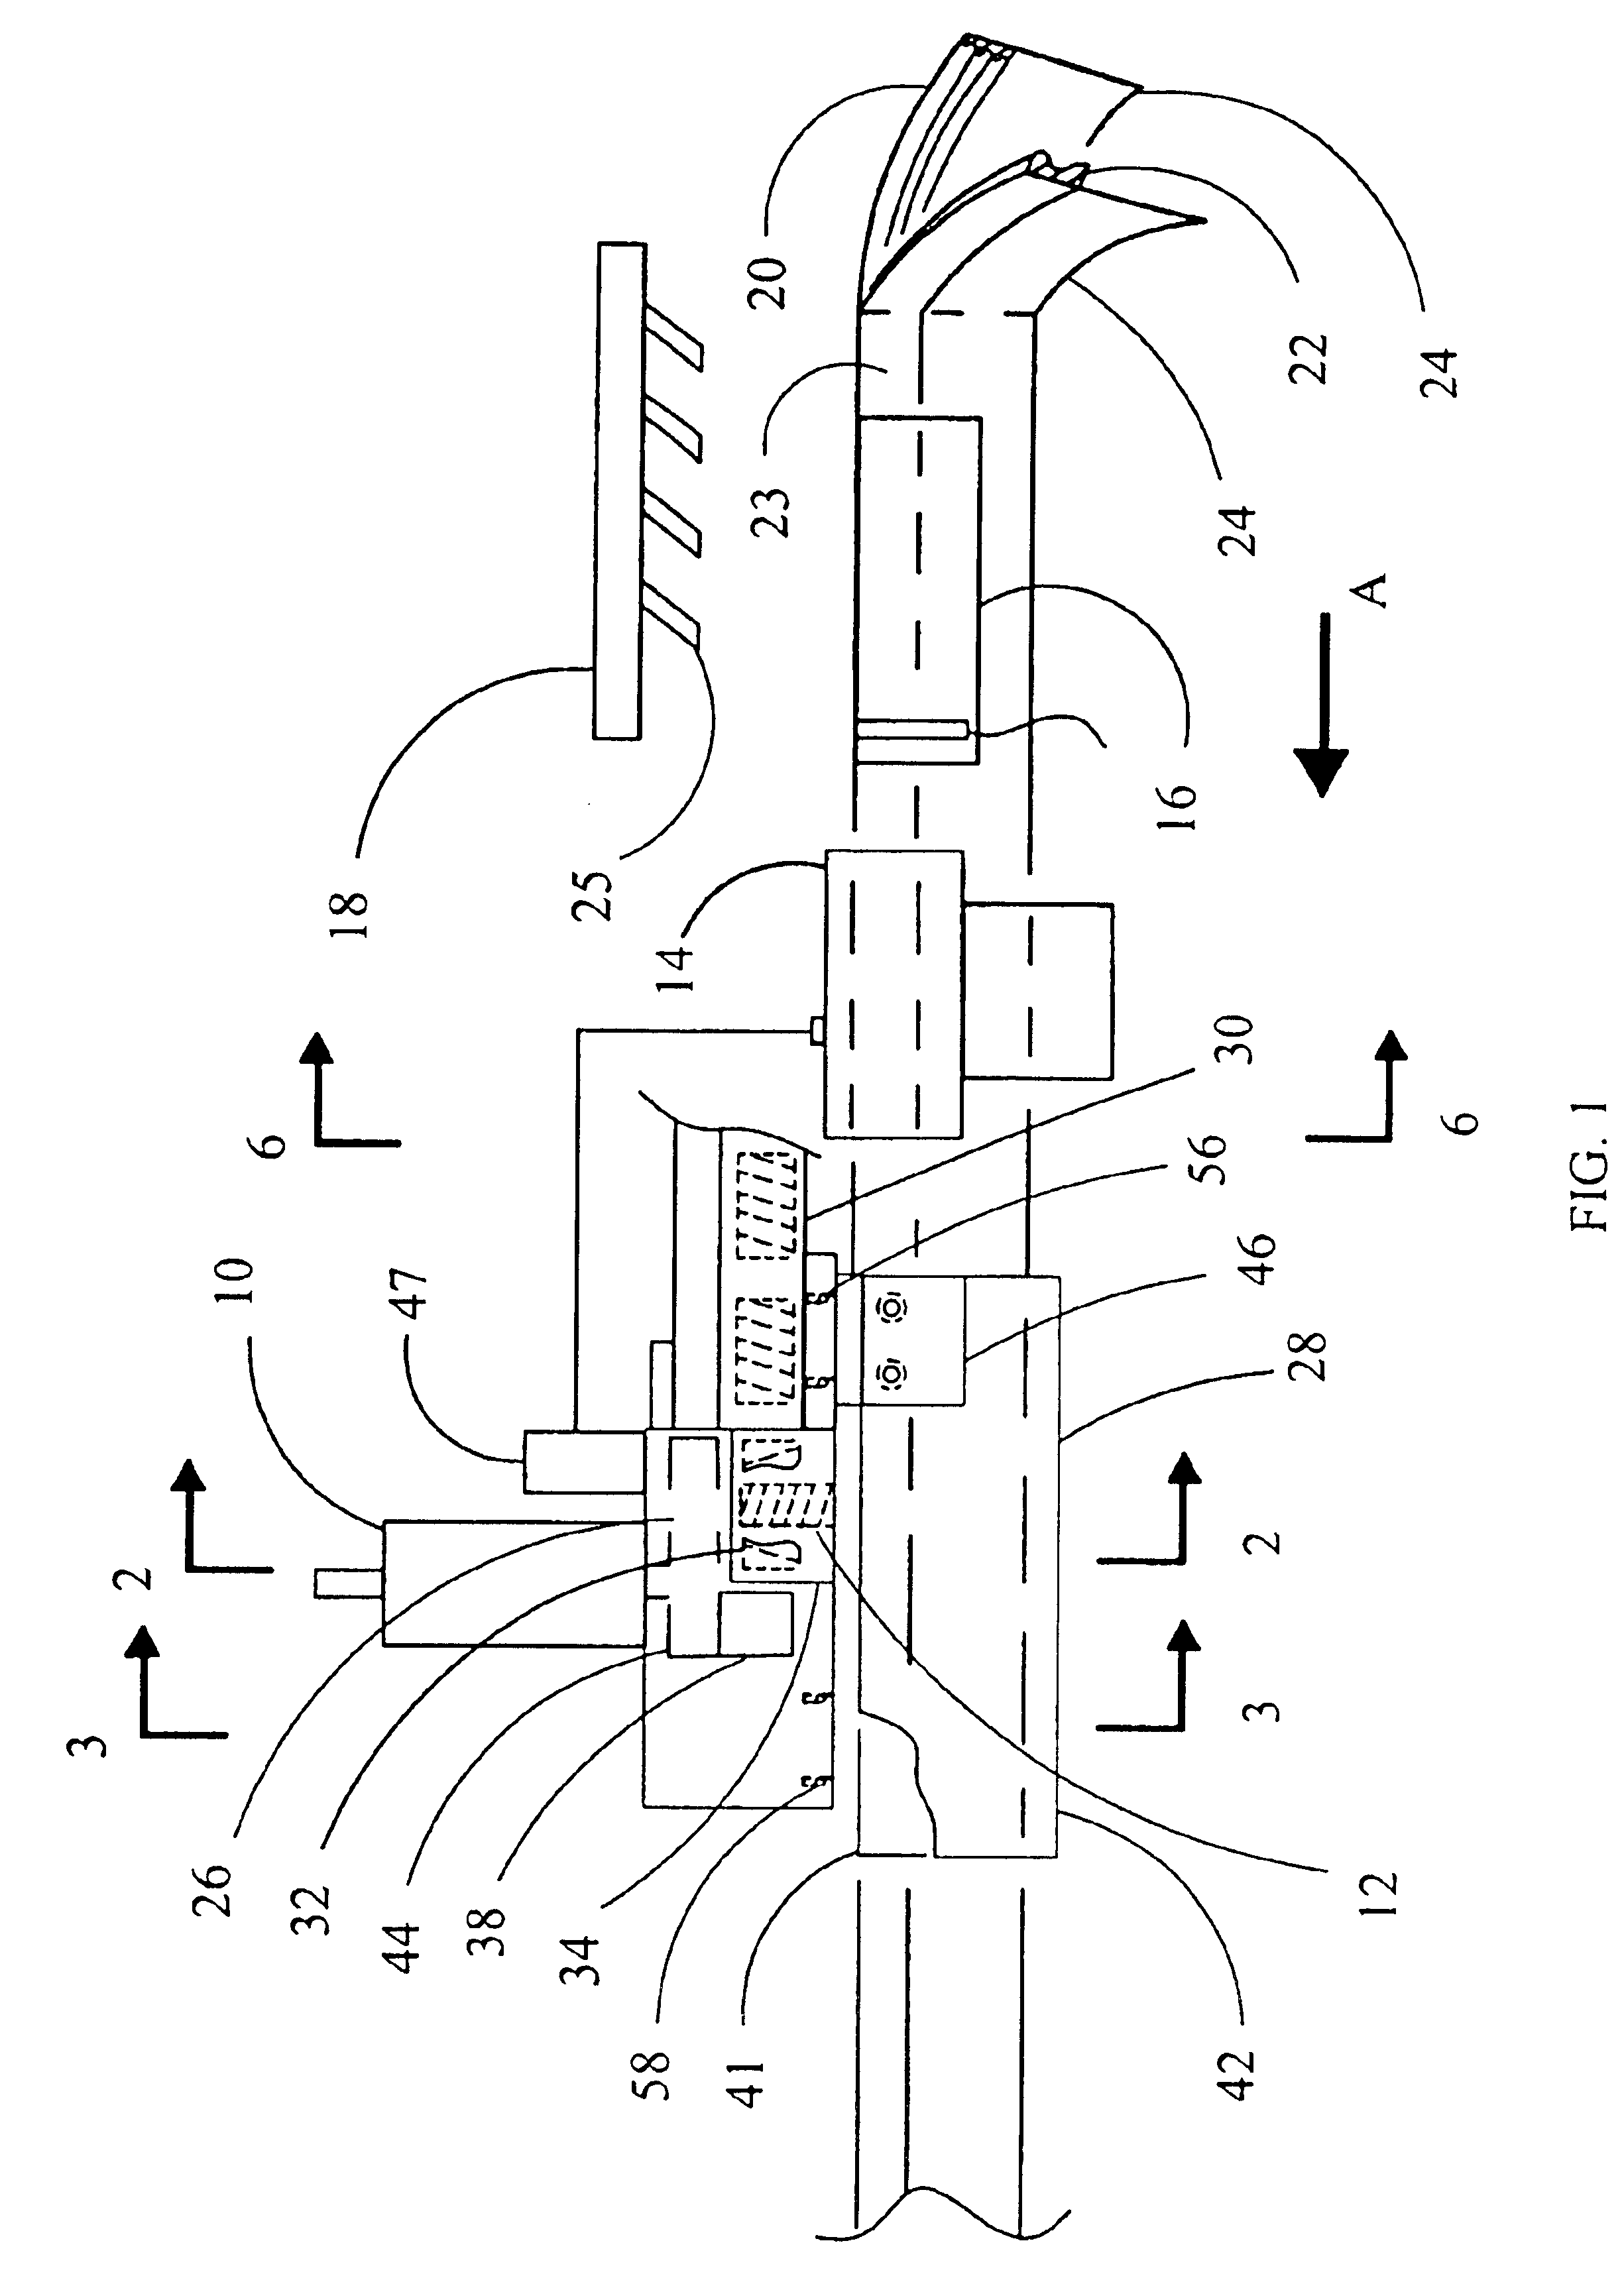 Apparatus for attaching sliders onto zipper bags and film